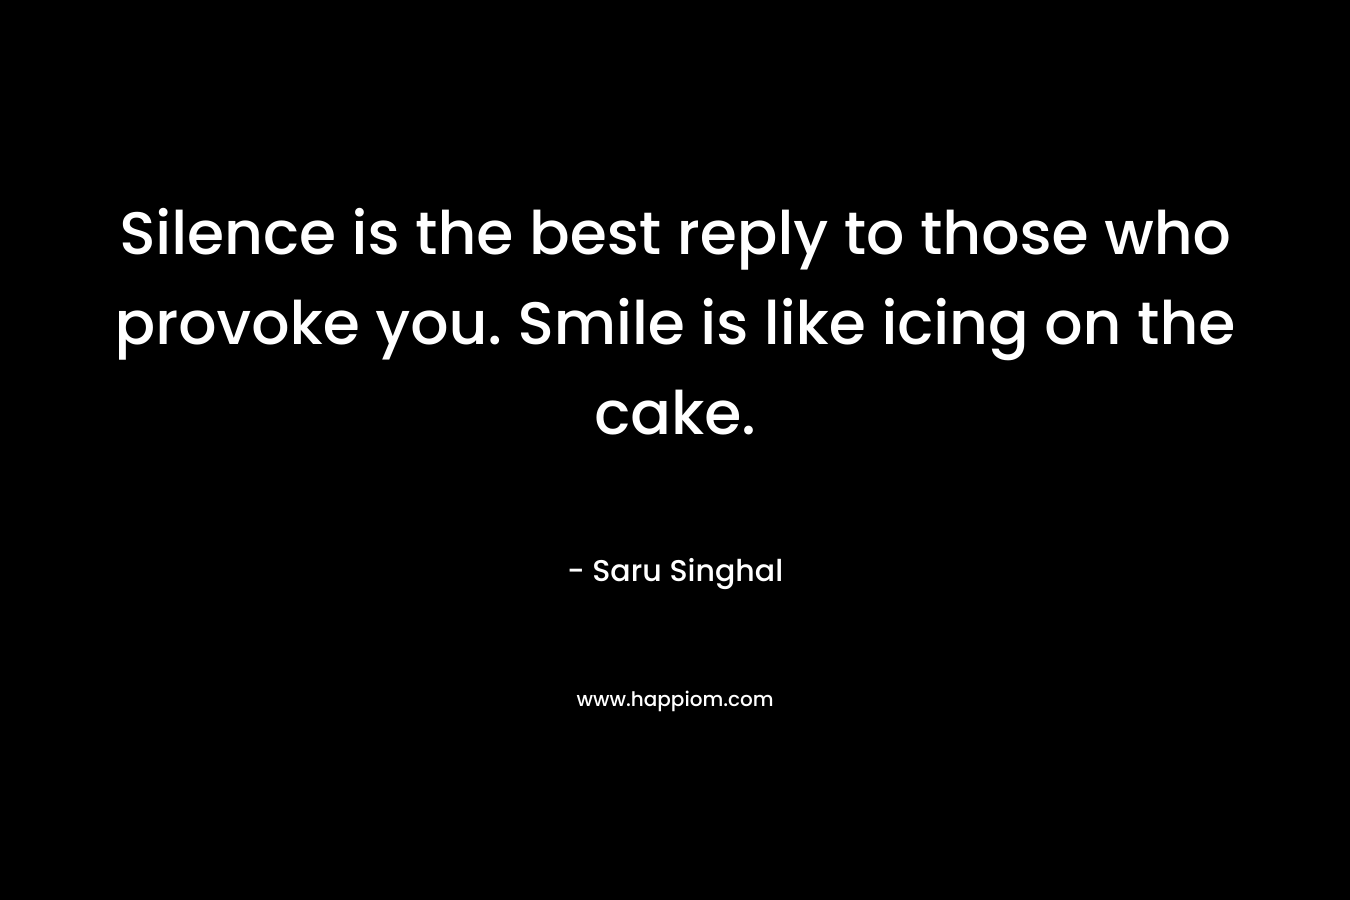 Silence is the best reply to those who provoke you. Smile is like icing on the cake. – Saru Singhal